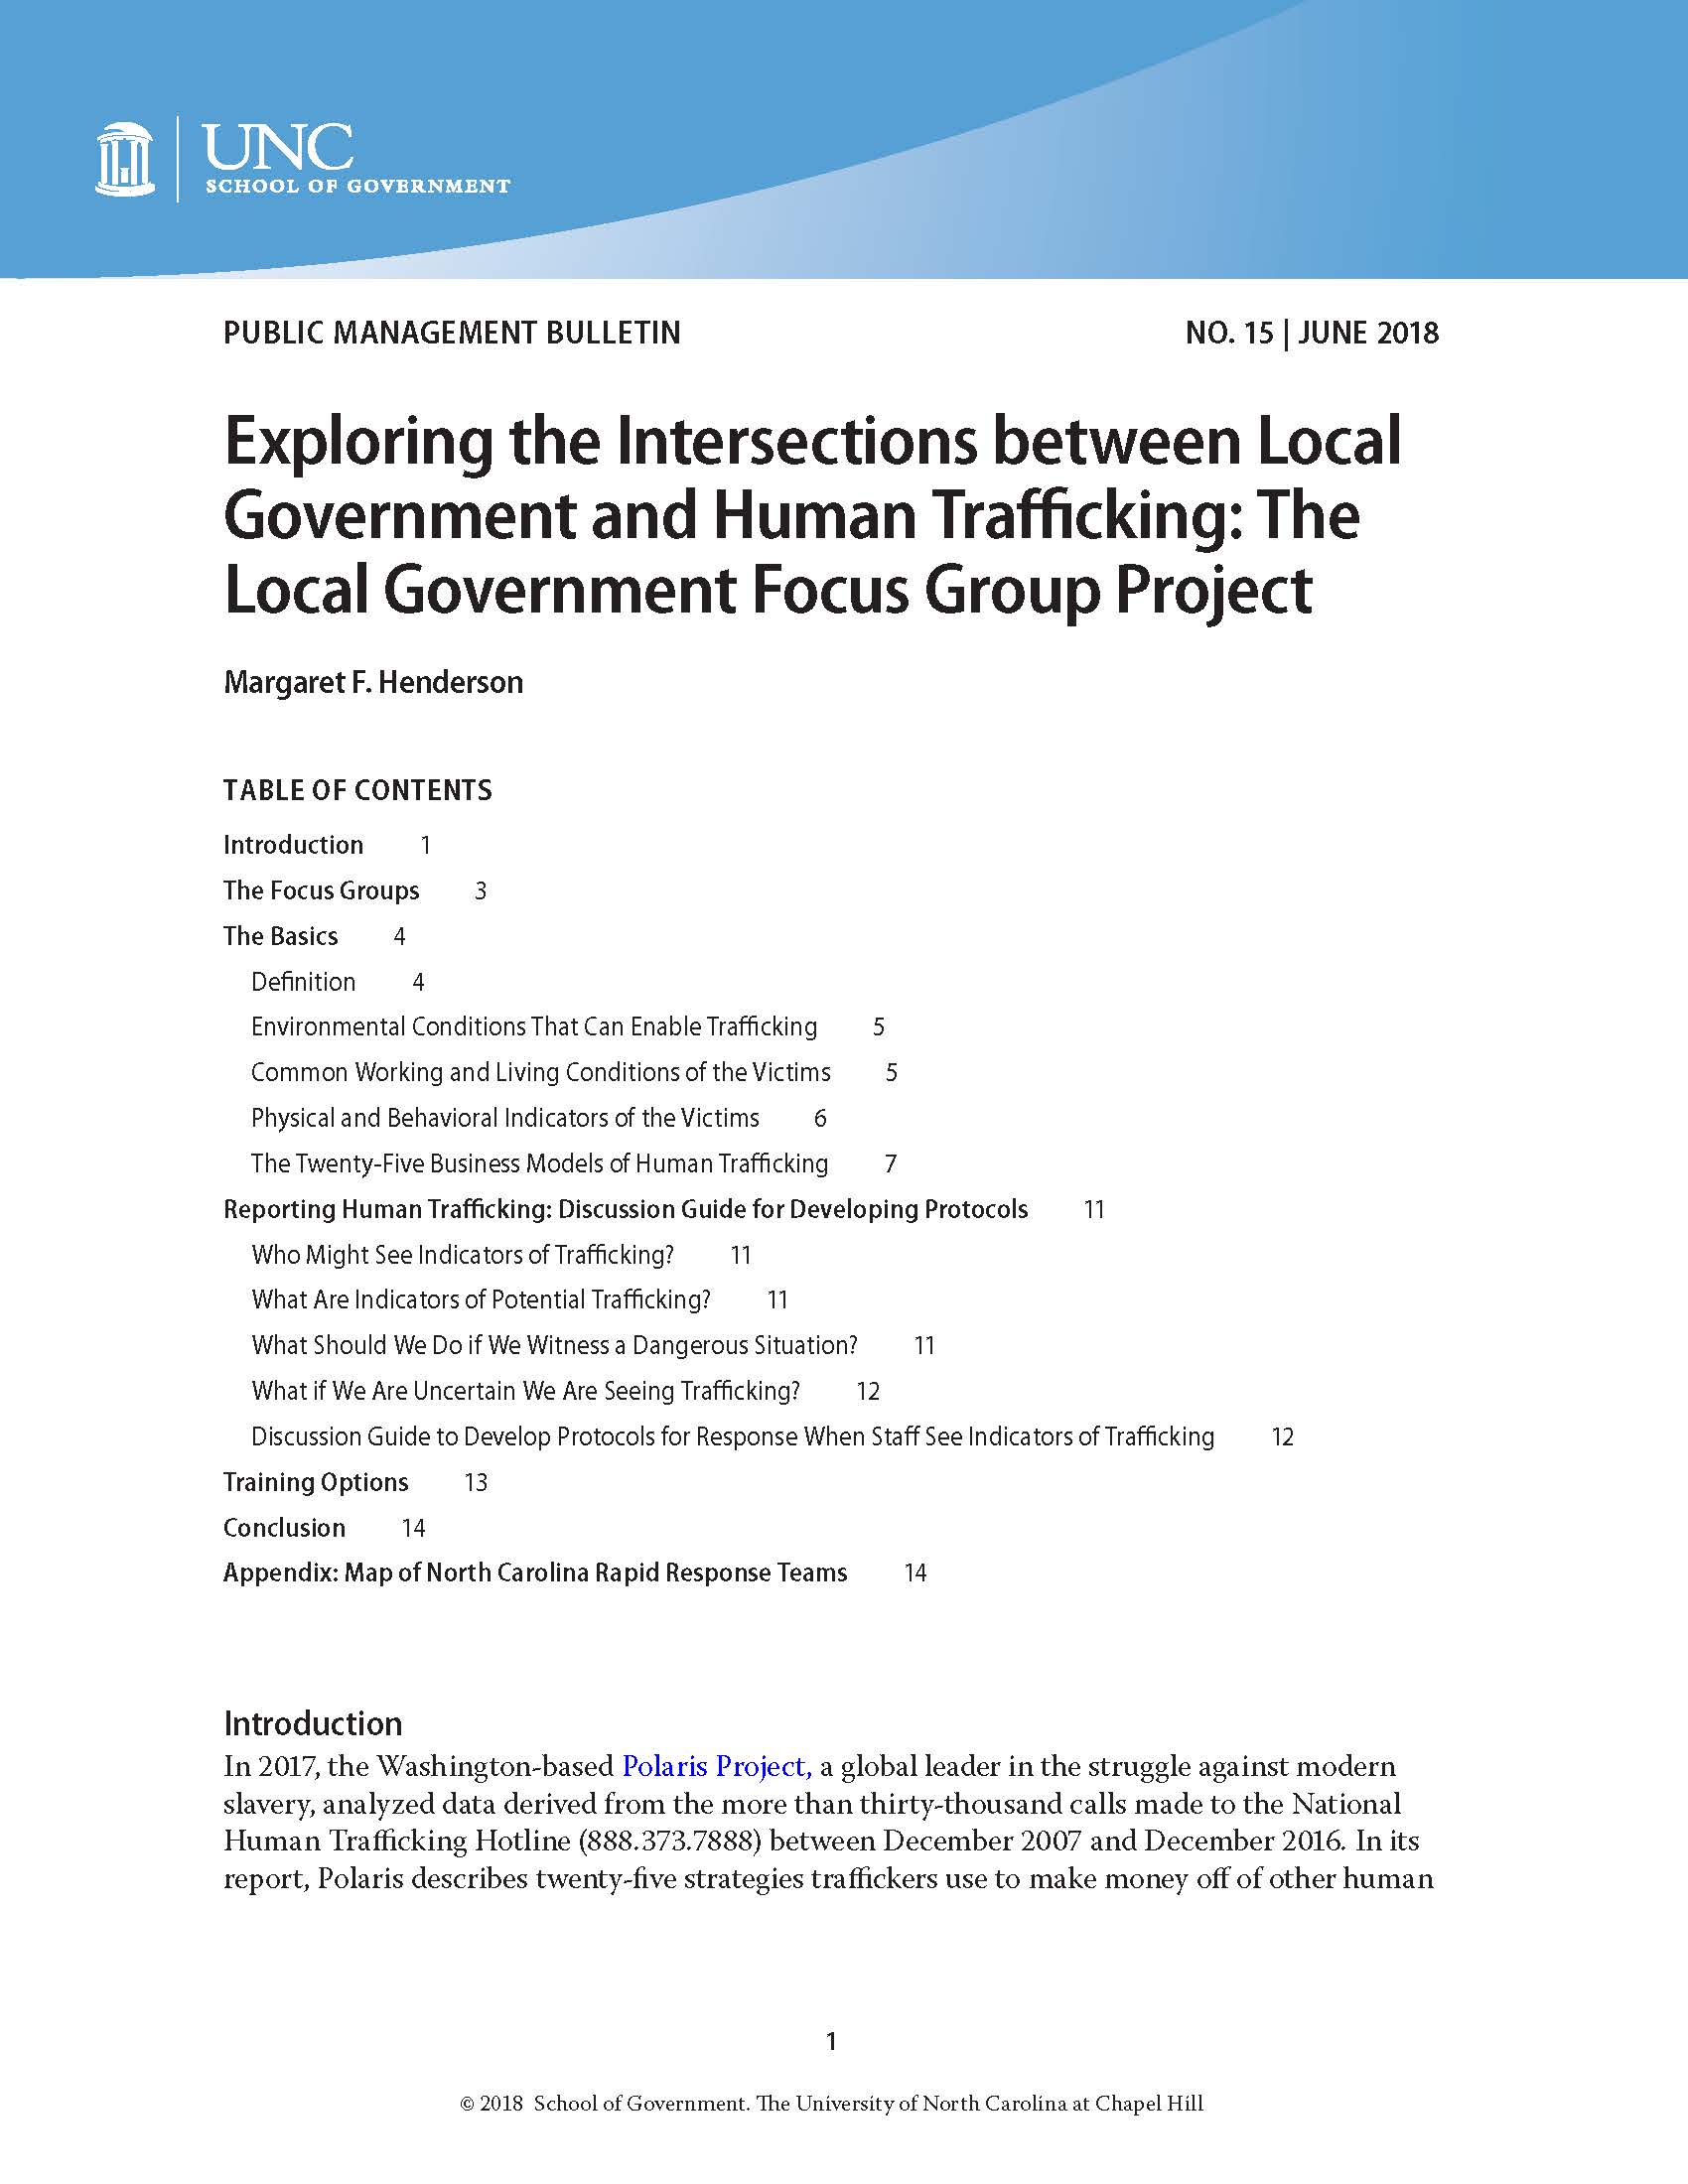 Cover image for Exploring the Intersections between Local Governments and Human Trafficking: The Local Government Focus Group Project